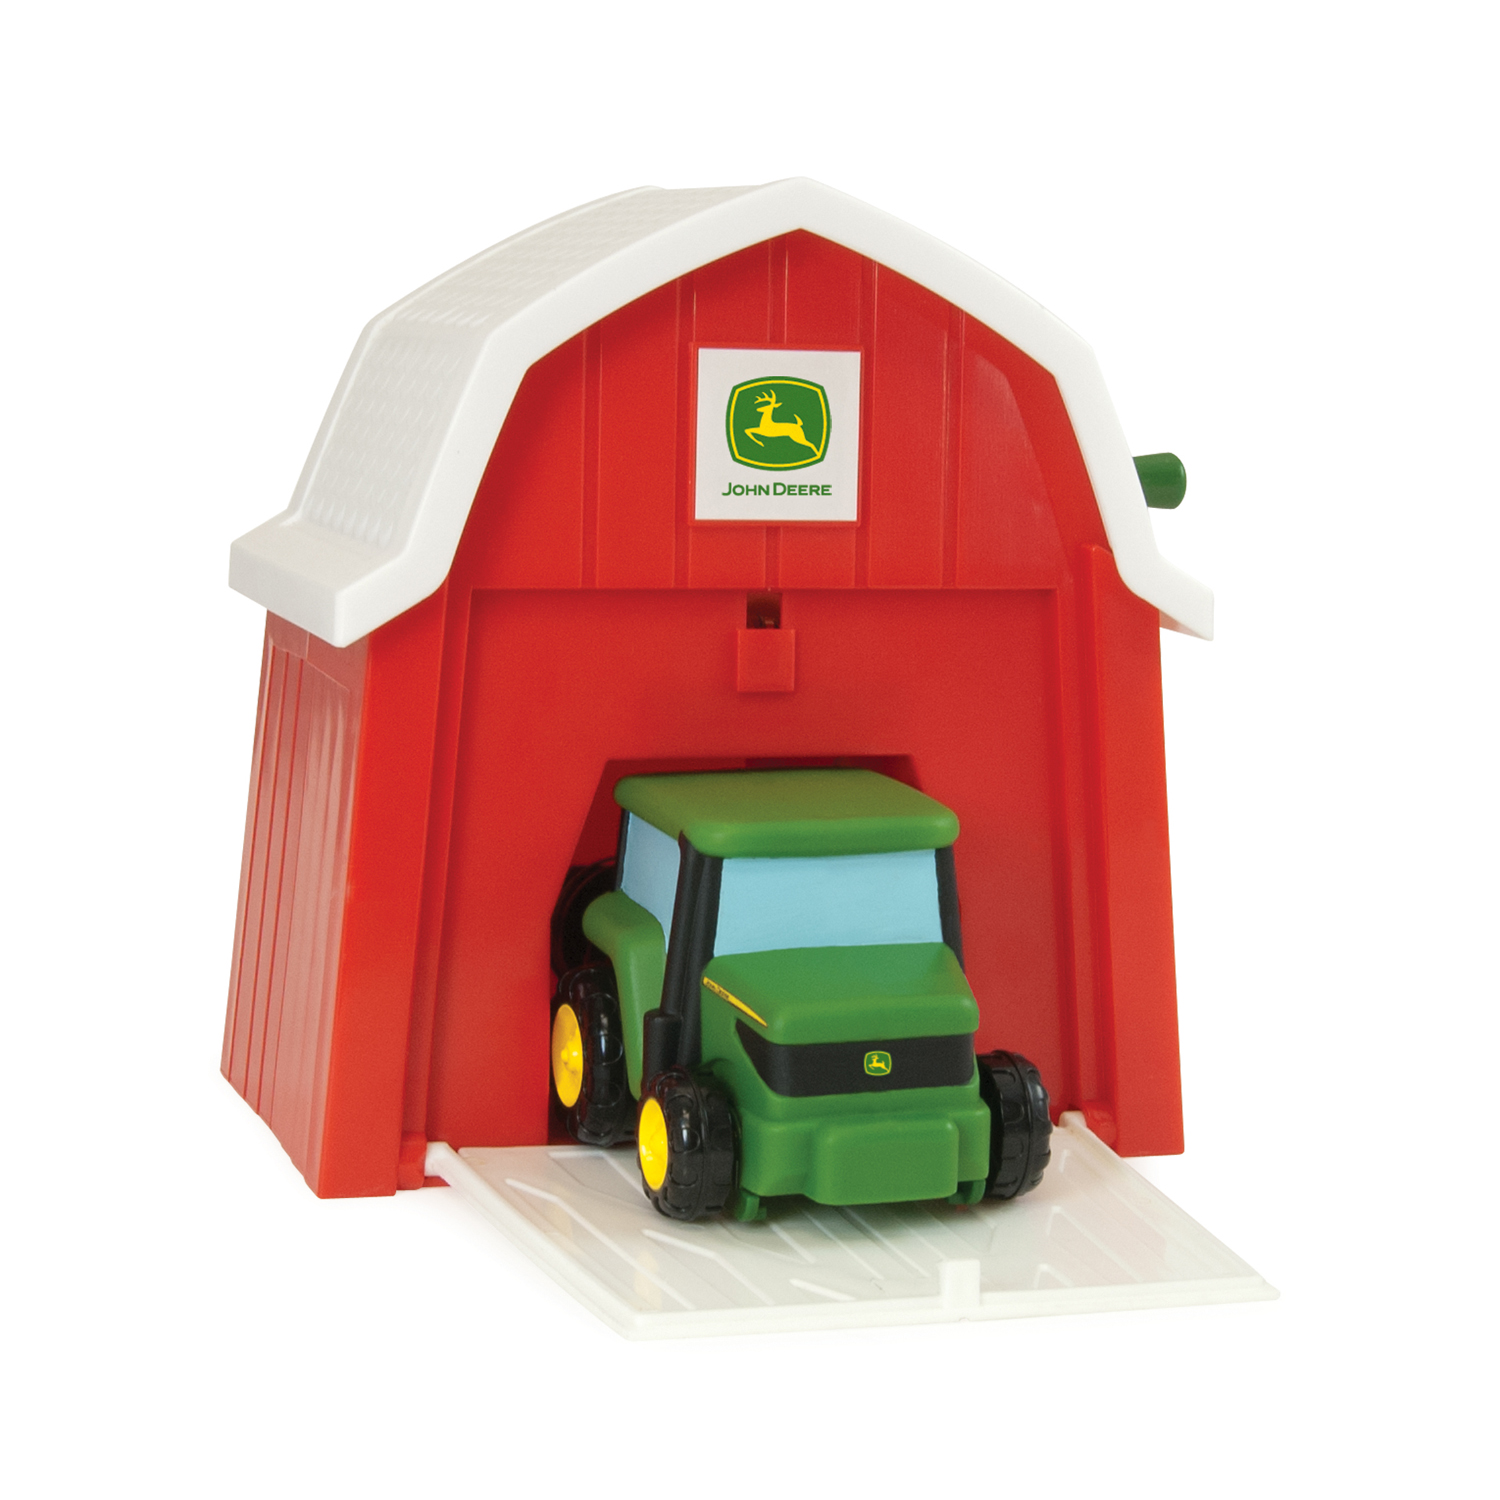 John+Deere+Toy+Barns John Deere Toys - Tractor in the Barn at ToyStop